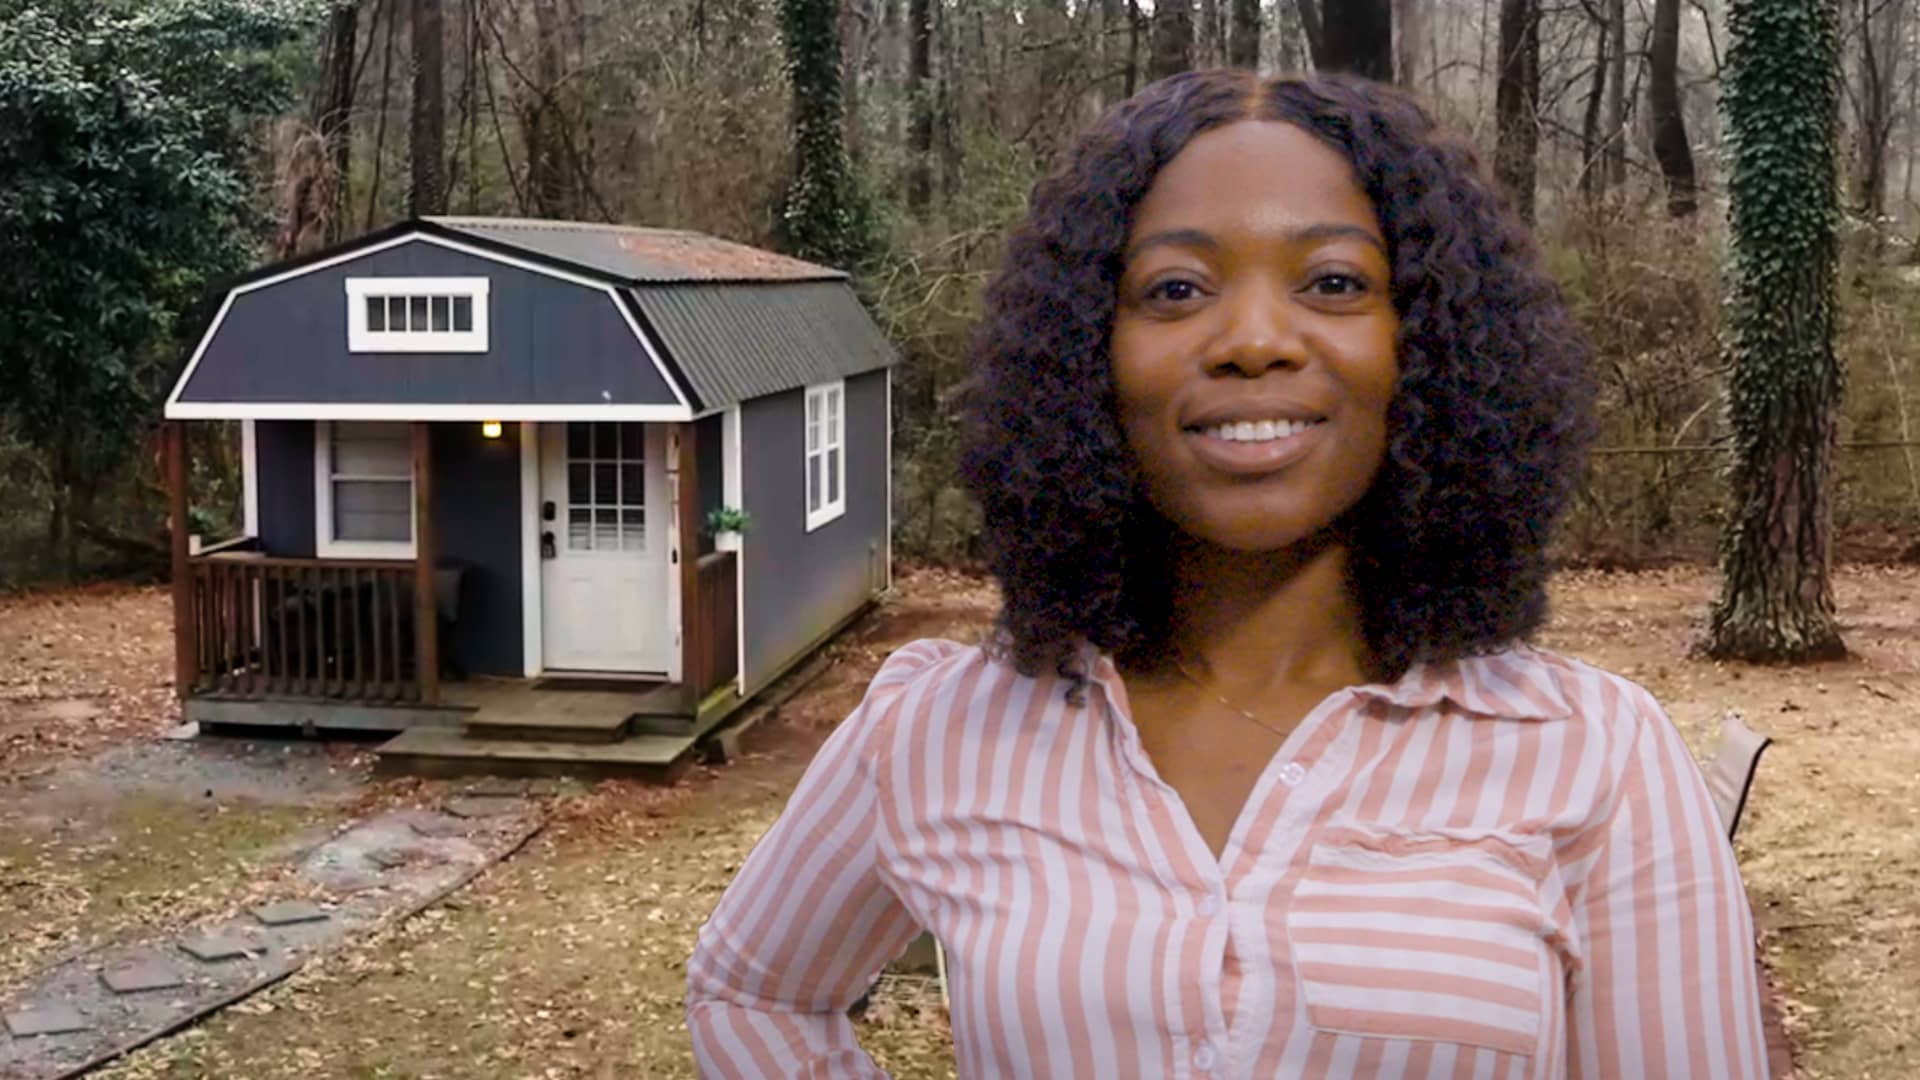 26-Year-Old Pays $0 To Live In A 'Luxury Tiny Home' She Built In Her  Backyard For $35,000—Take A Look Inside